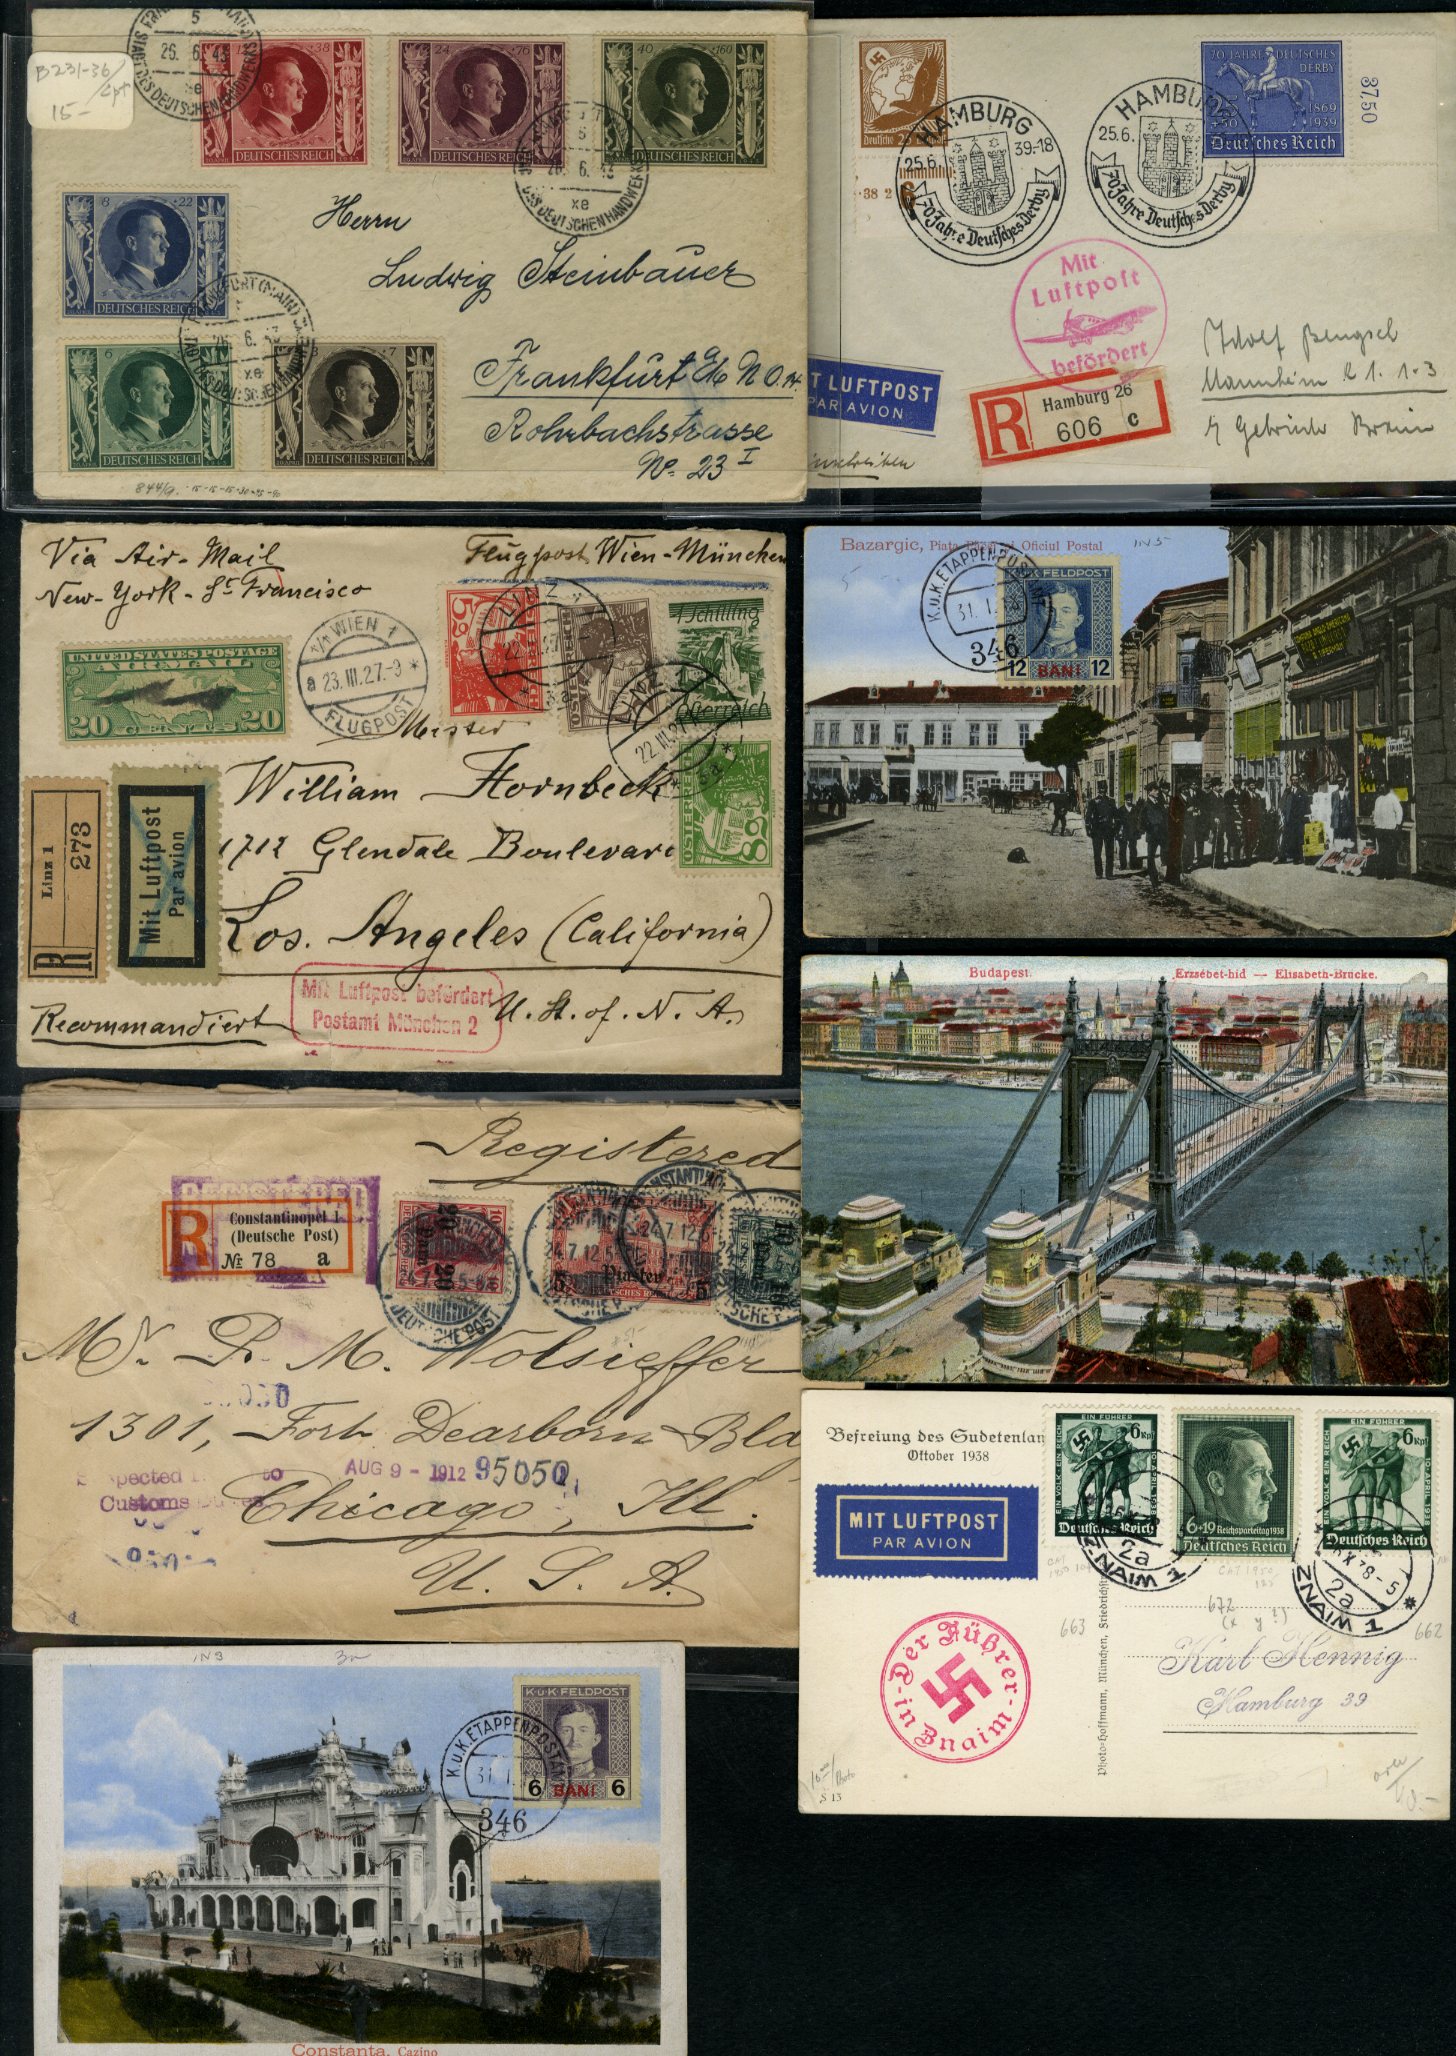 Lot 1550 - LARGE LOTS AND COLLECTIONS WORLDWIDE COVERS AND POSTAL HISTORY  -  Cherrystone Auctions U.S. & Worldwide Stamps & Postal History